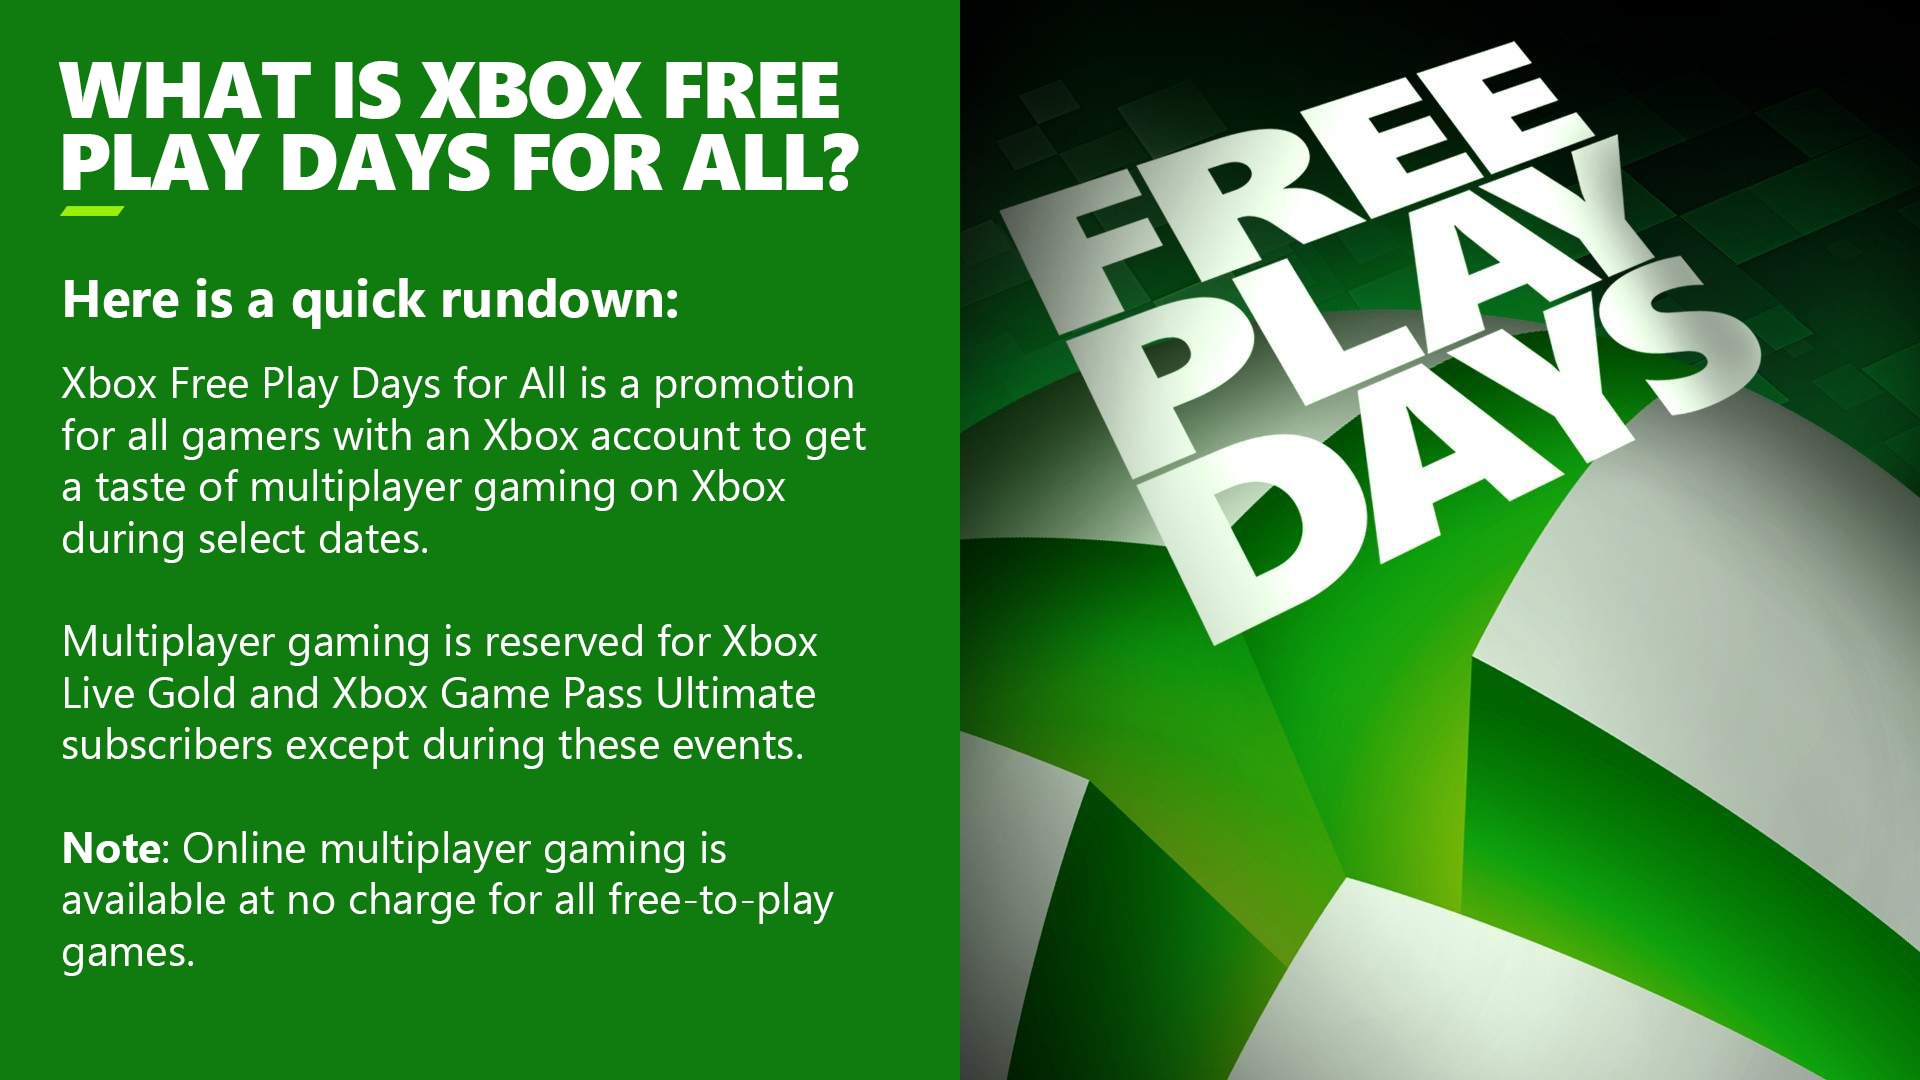 Xbox Support on X: The errands are done, you're getting free time on your  hands, and the weekend is on the way. Sounds like a perfect time for Xbox Free  Play Days.